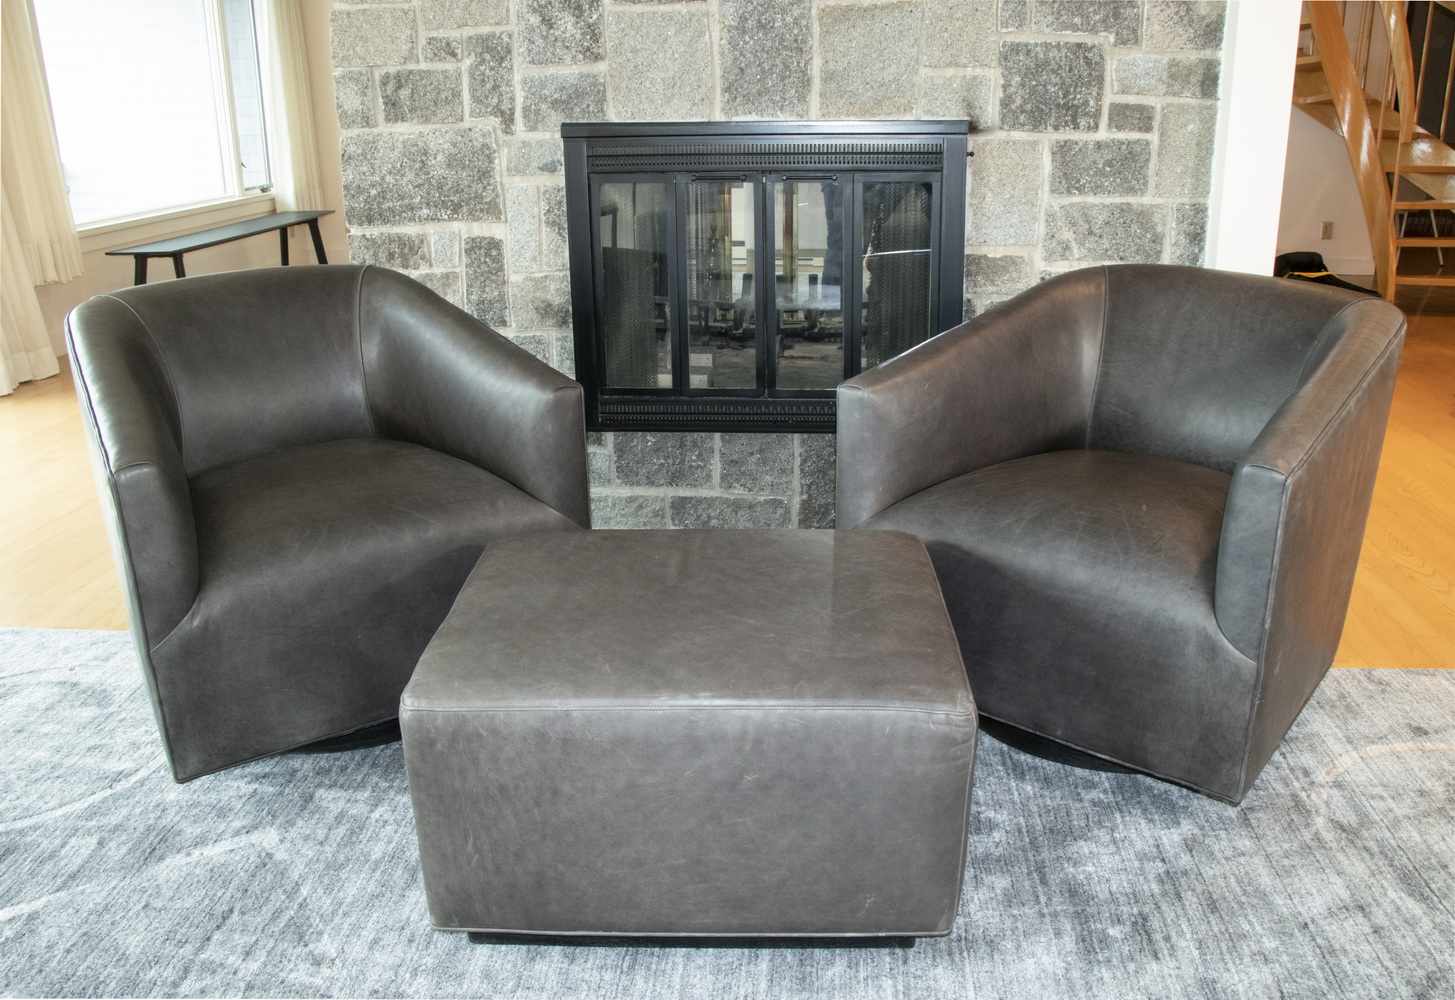 PR OF BLACK LEATHER ARMCHAIRS WITH